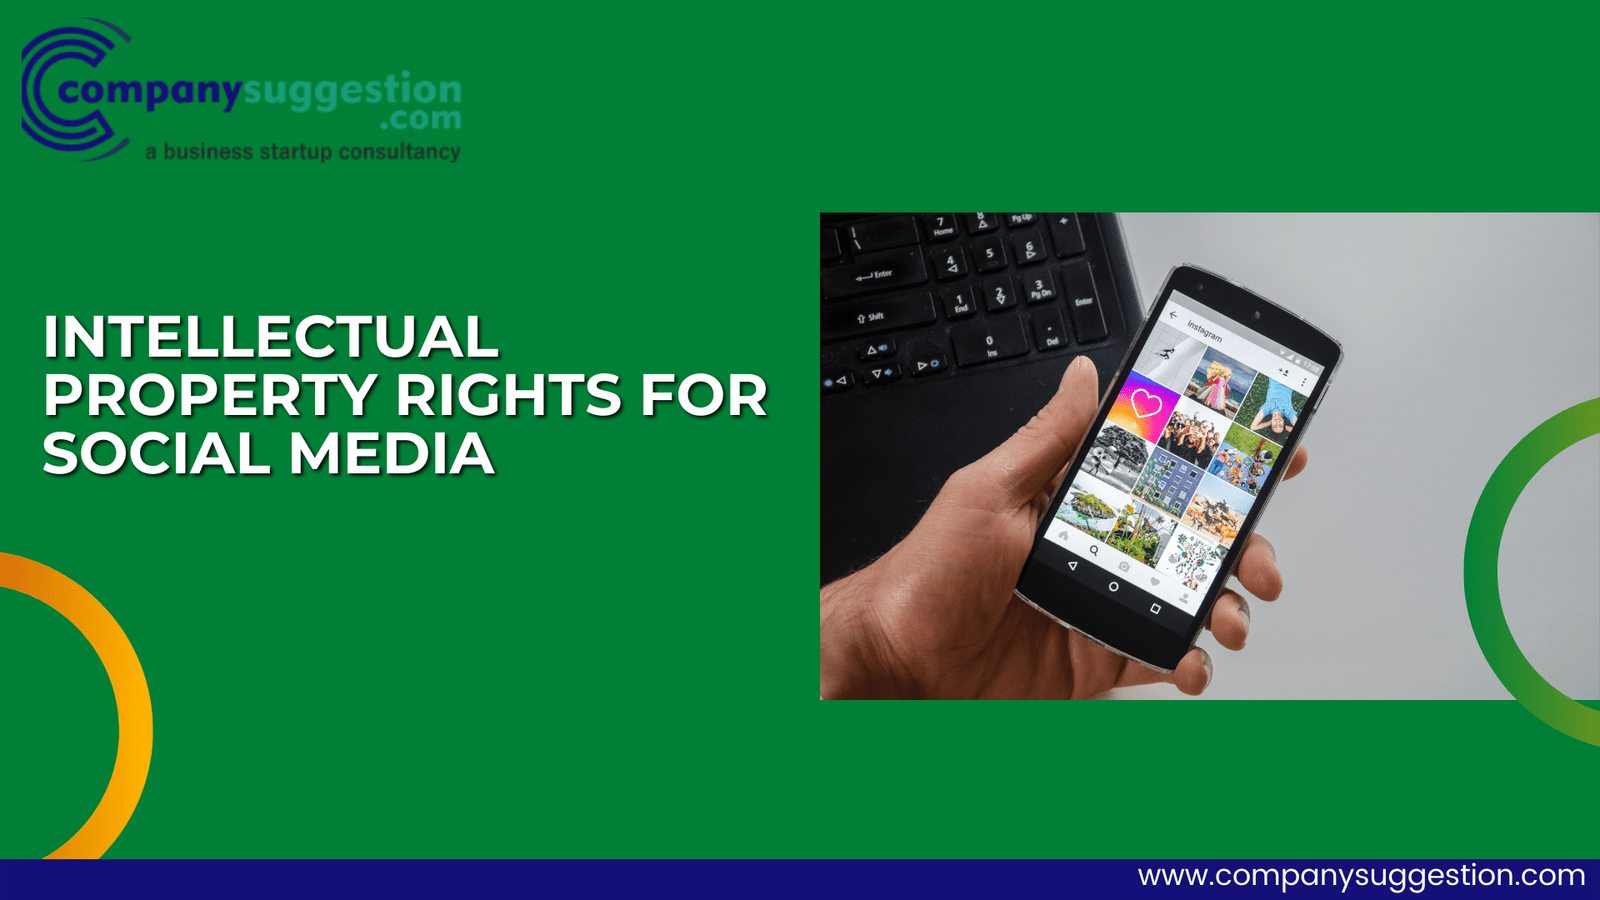 Intellectual property rights for social media